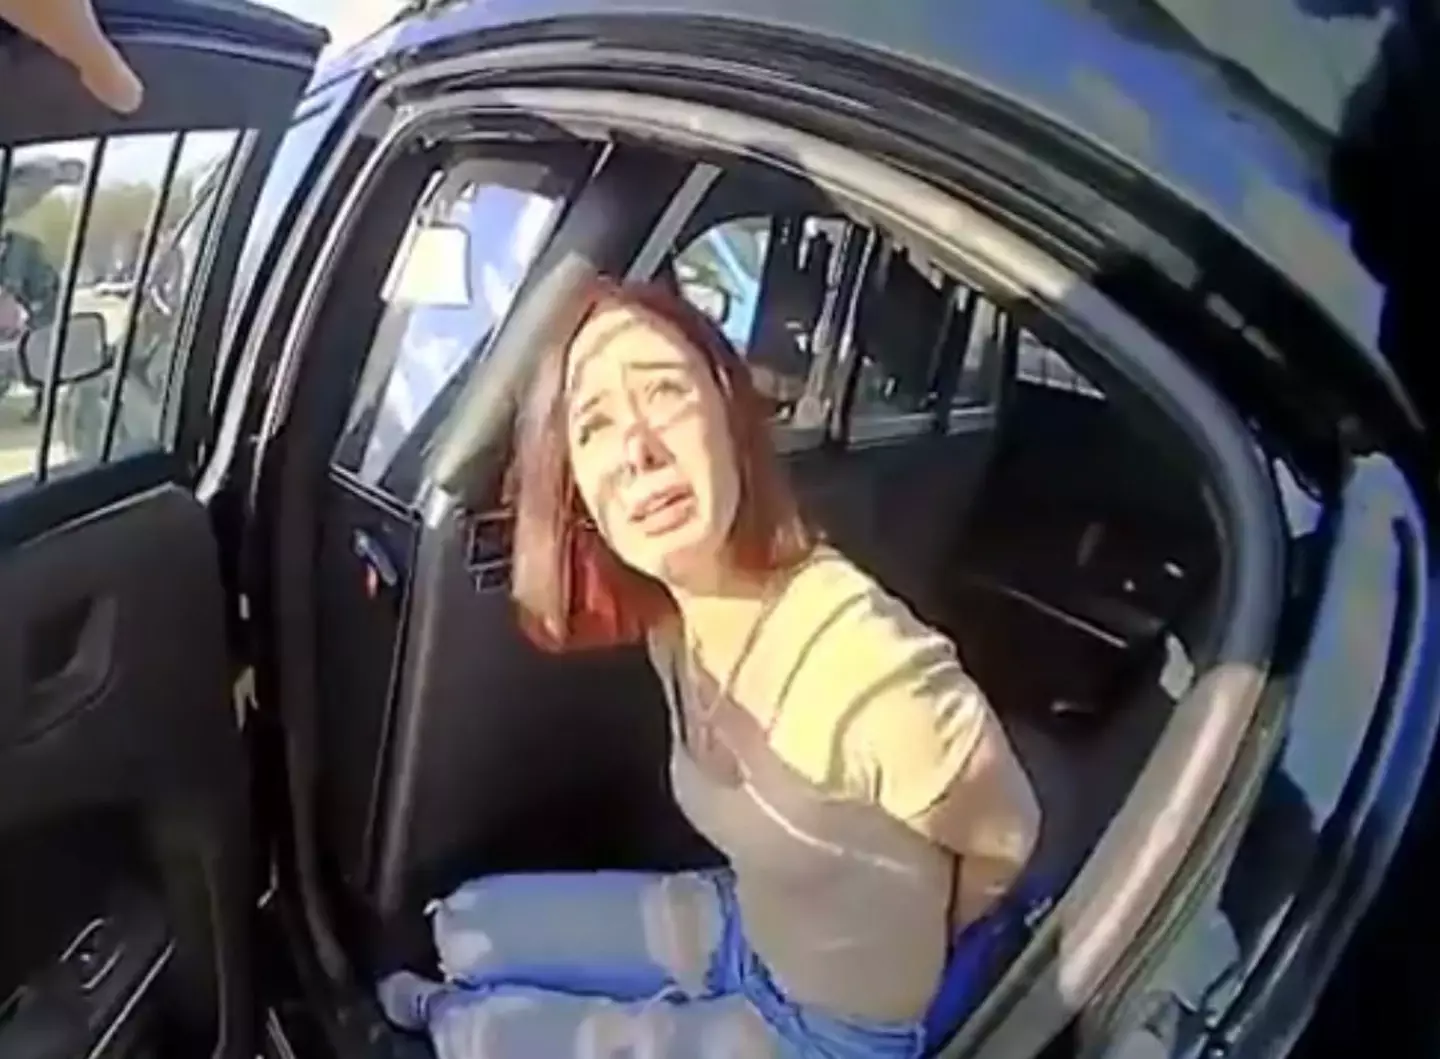 Cringeworthy bodycam footage shows a woman trying to seduce a cop as he arrests her for 'drunk driving'.